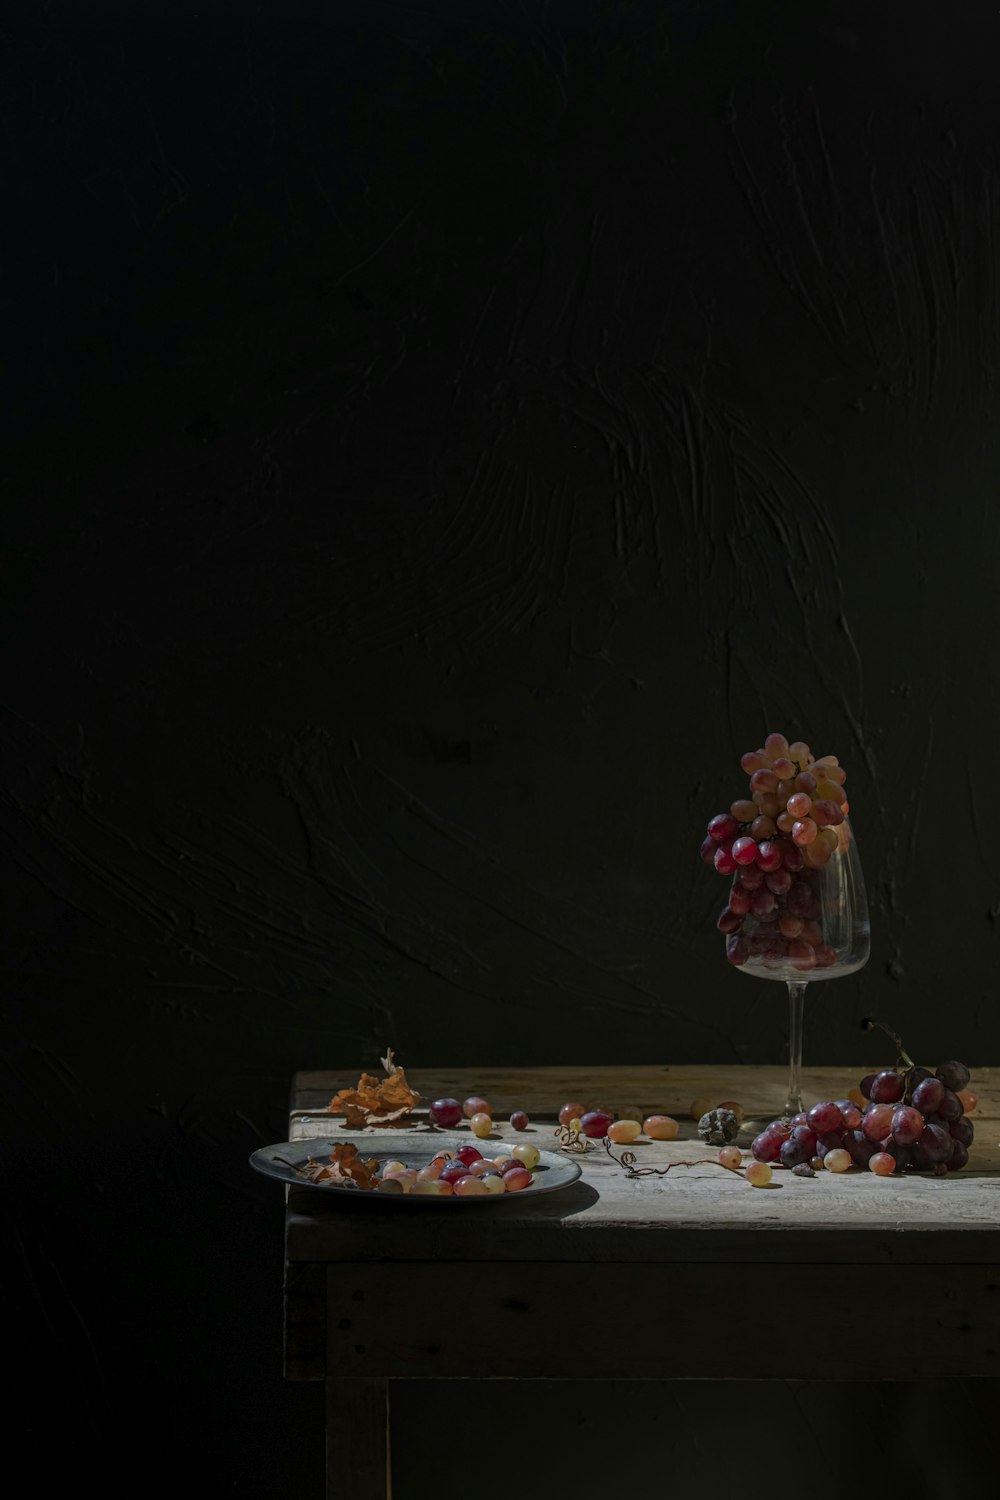 a table topped with a bowl of grapes next to a plate of food